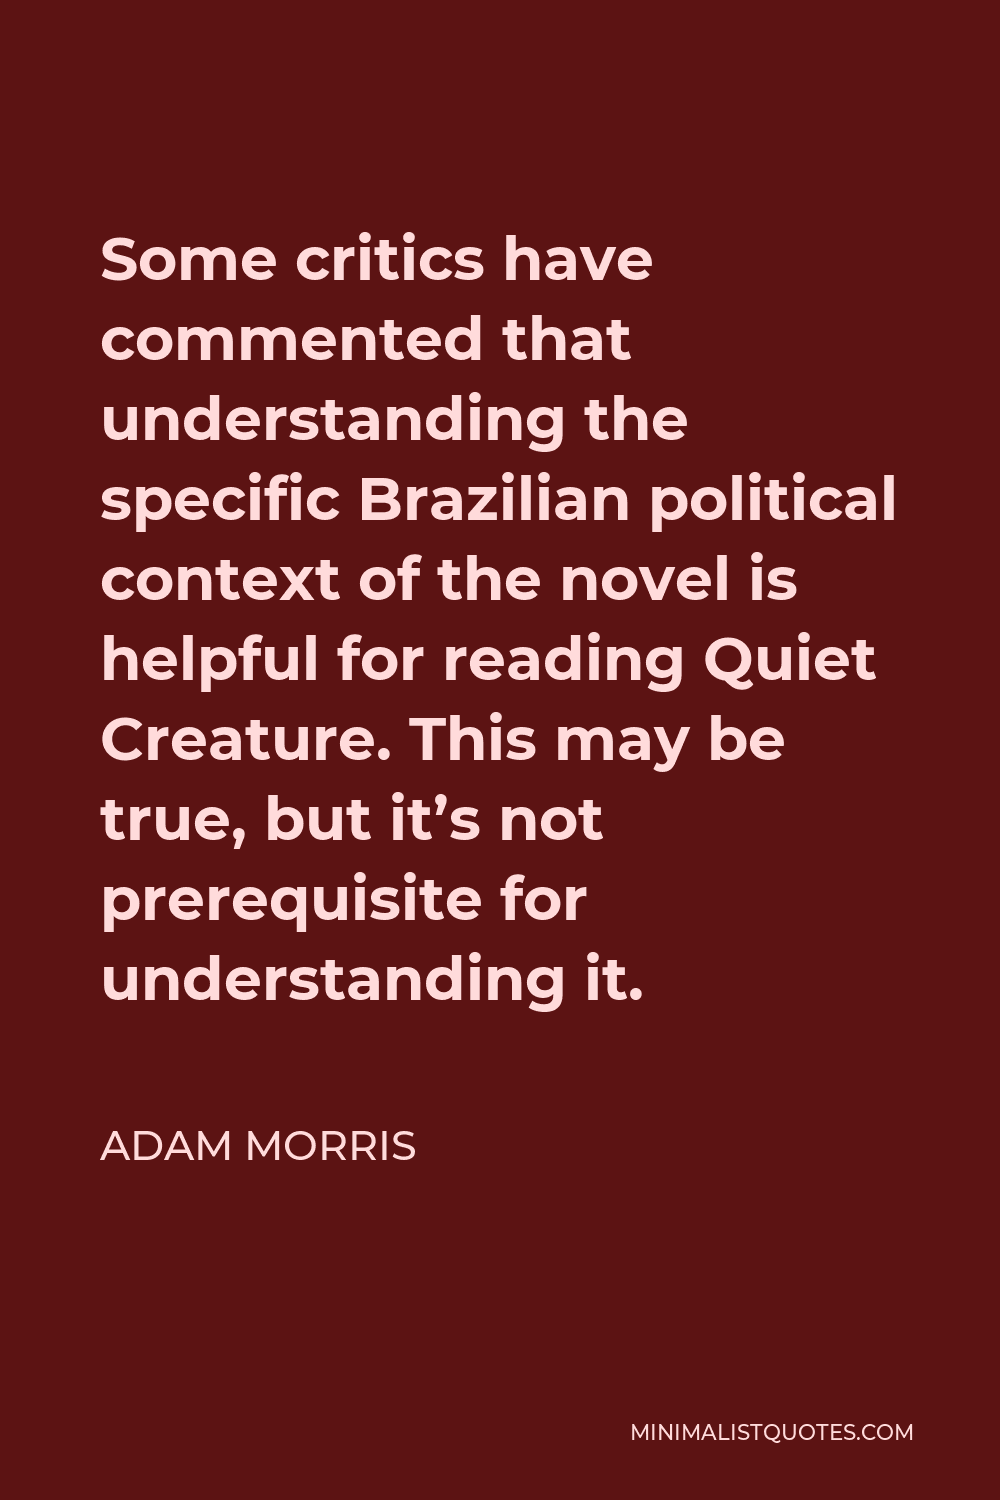 Adam Morris Quote - Some critics have commented that understanding the specific Brazilian political context of the novel is helpful for reading Quiet Creature. This may be true, but it’s not prerequisite for understanding it.